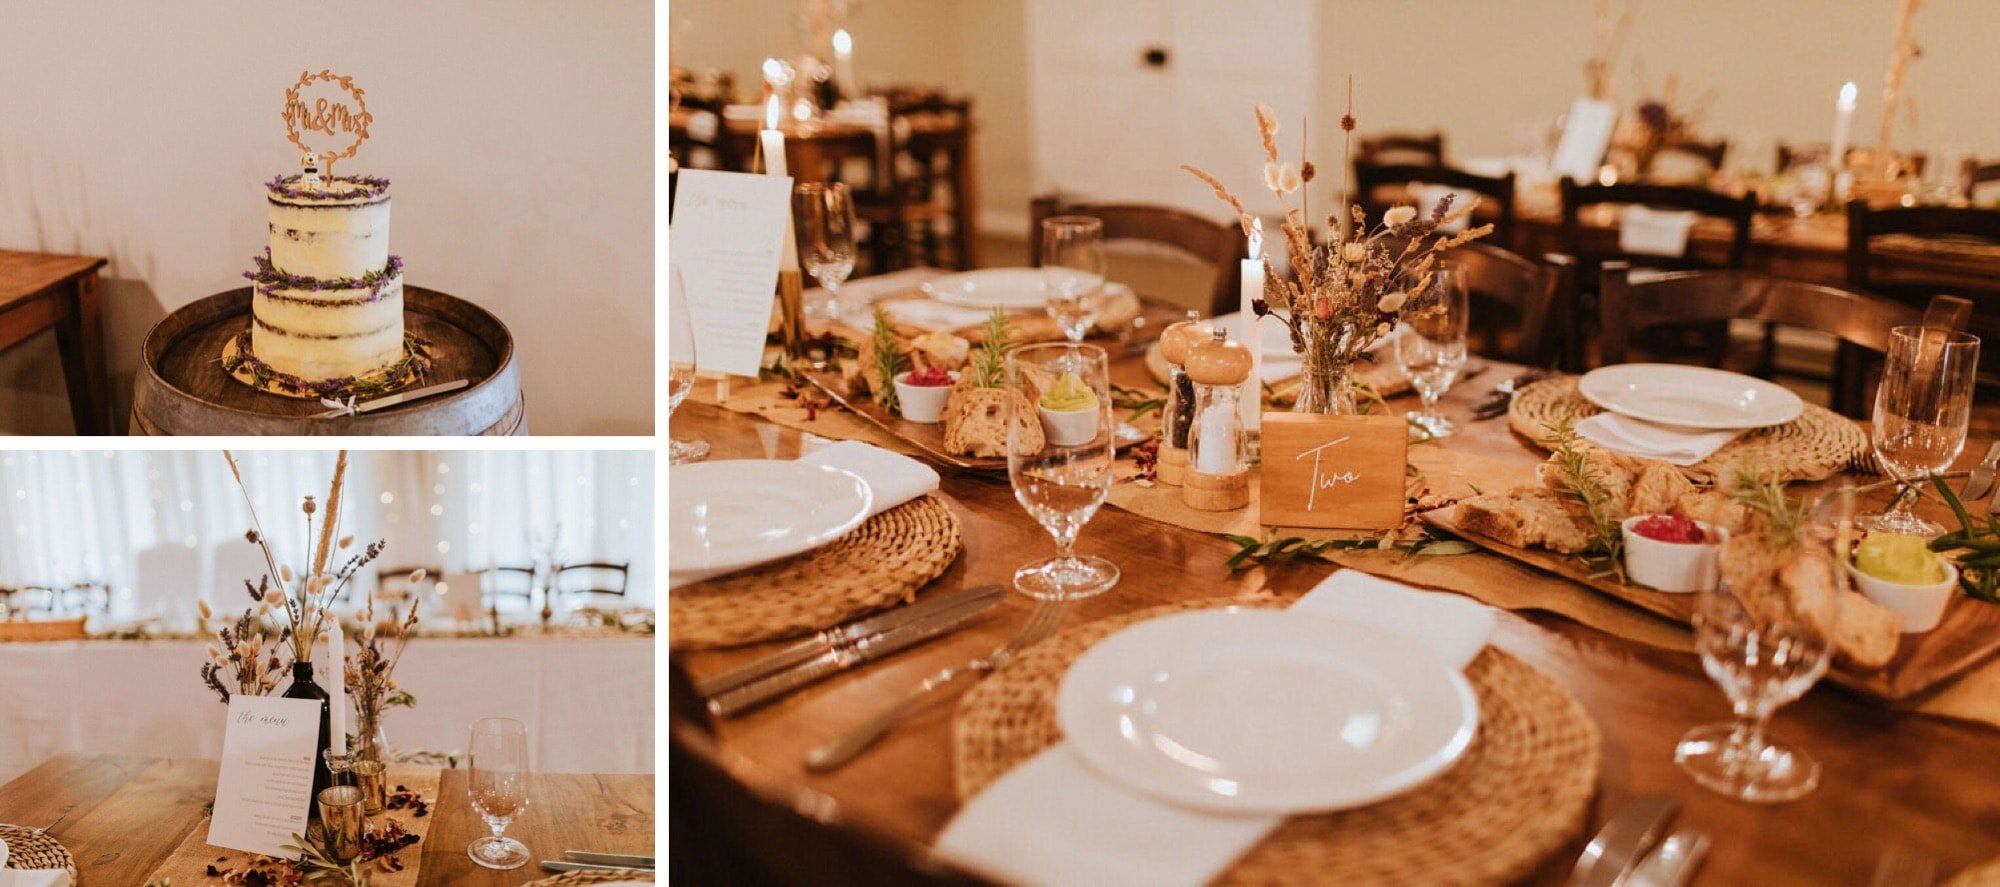  Gemma did all her own styling and decor items. She has since opened her own wedding hire business - Chapter Two Events.  